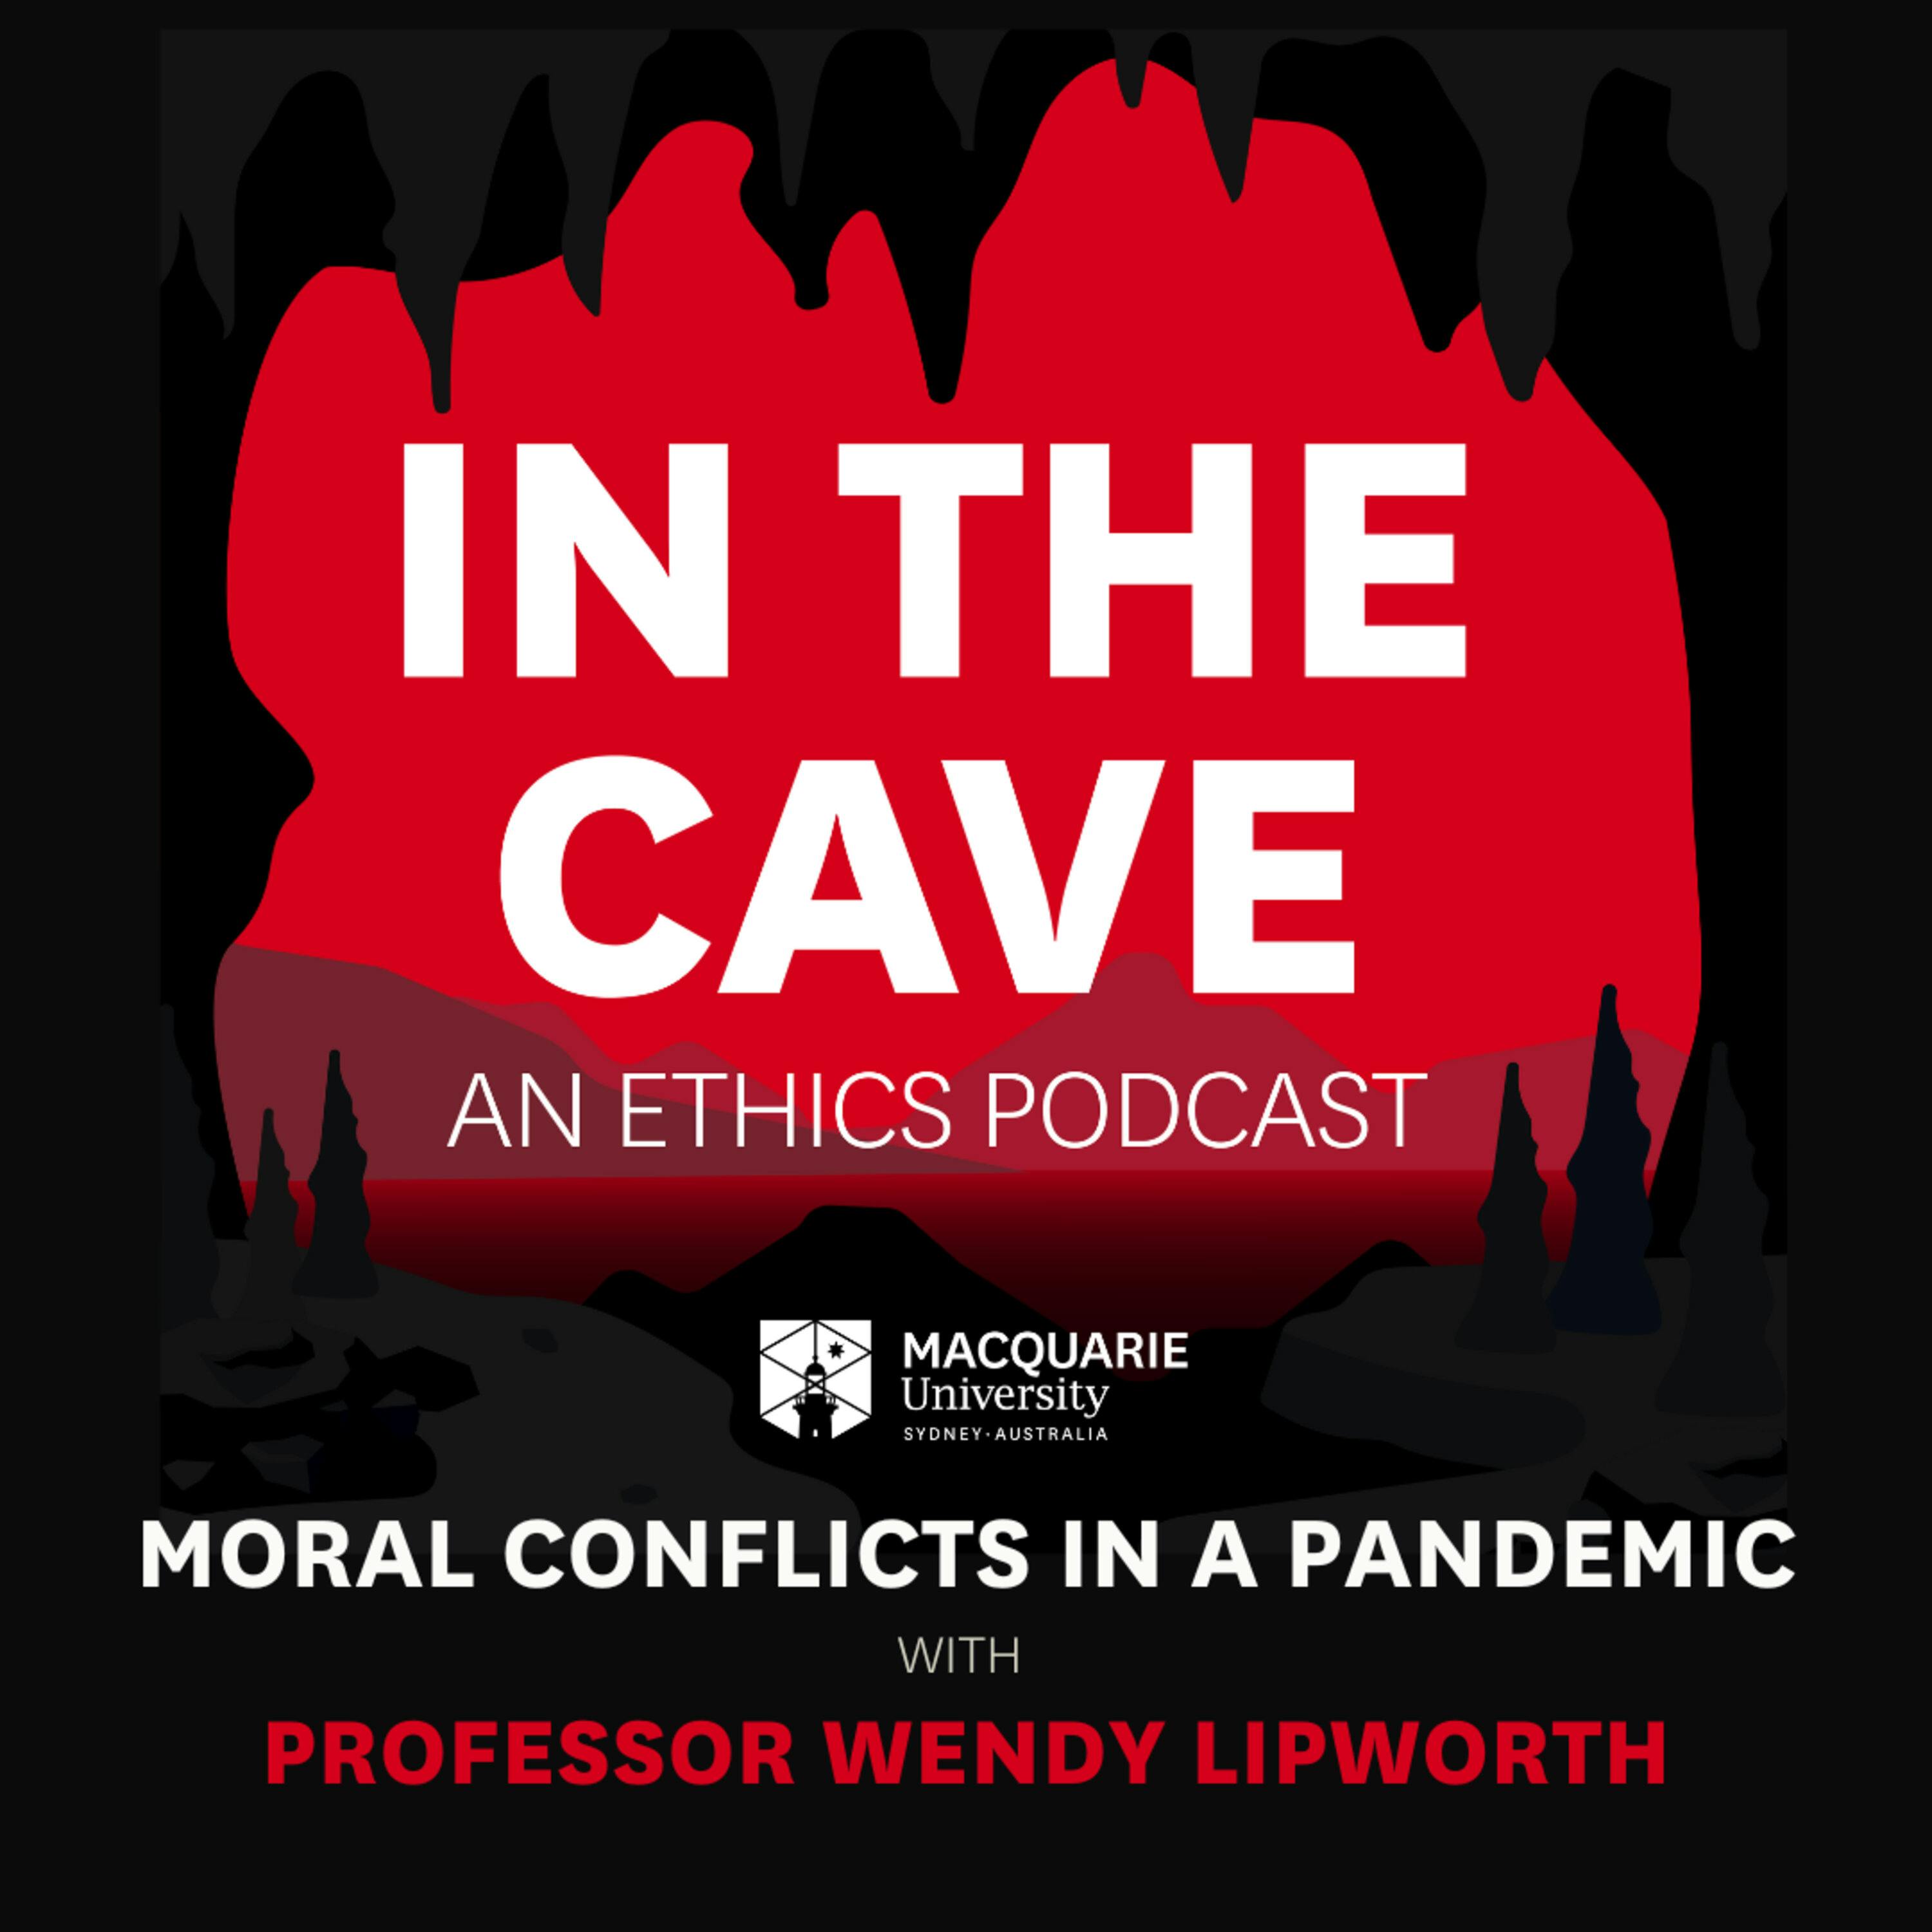 Moral Conflicts in a Pandemic with Professor Wendy Lipworth